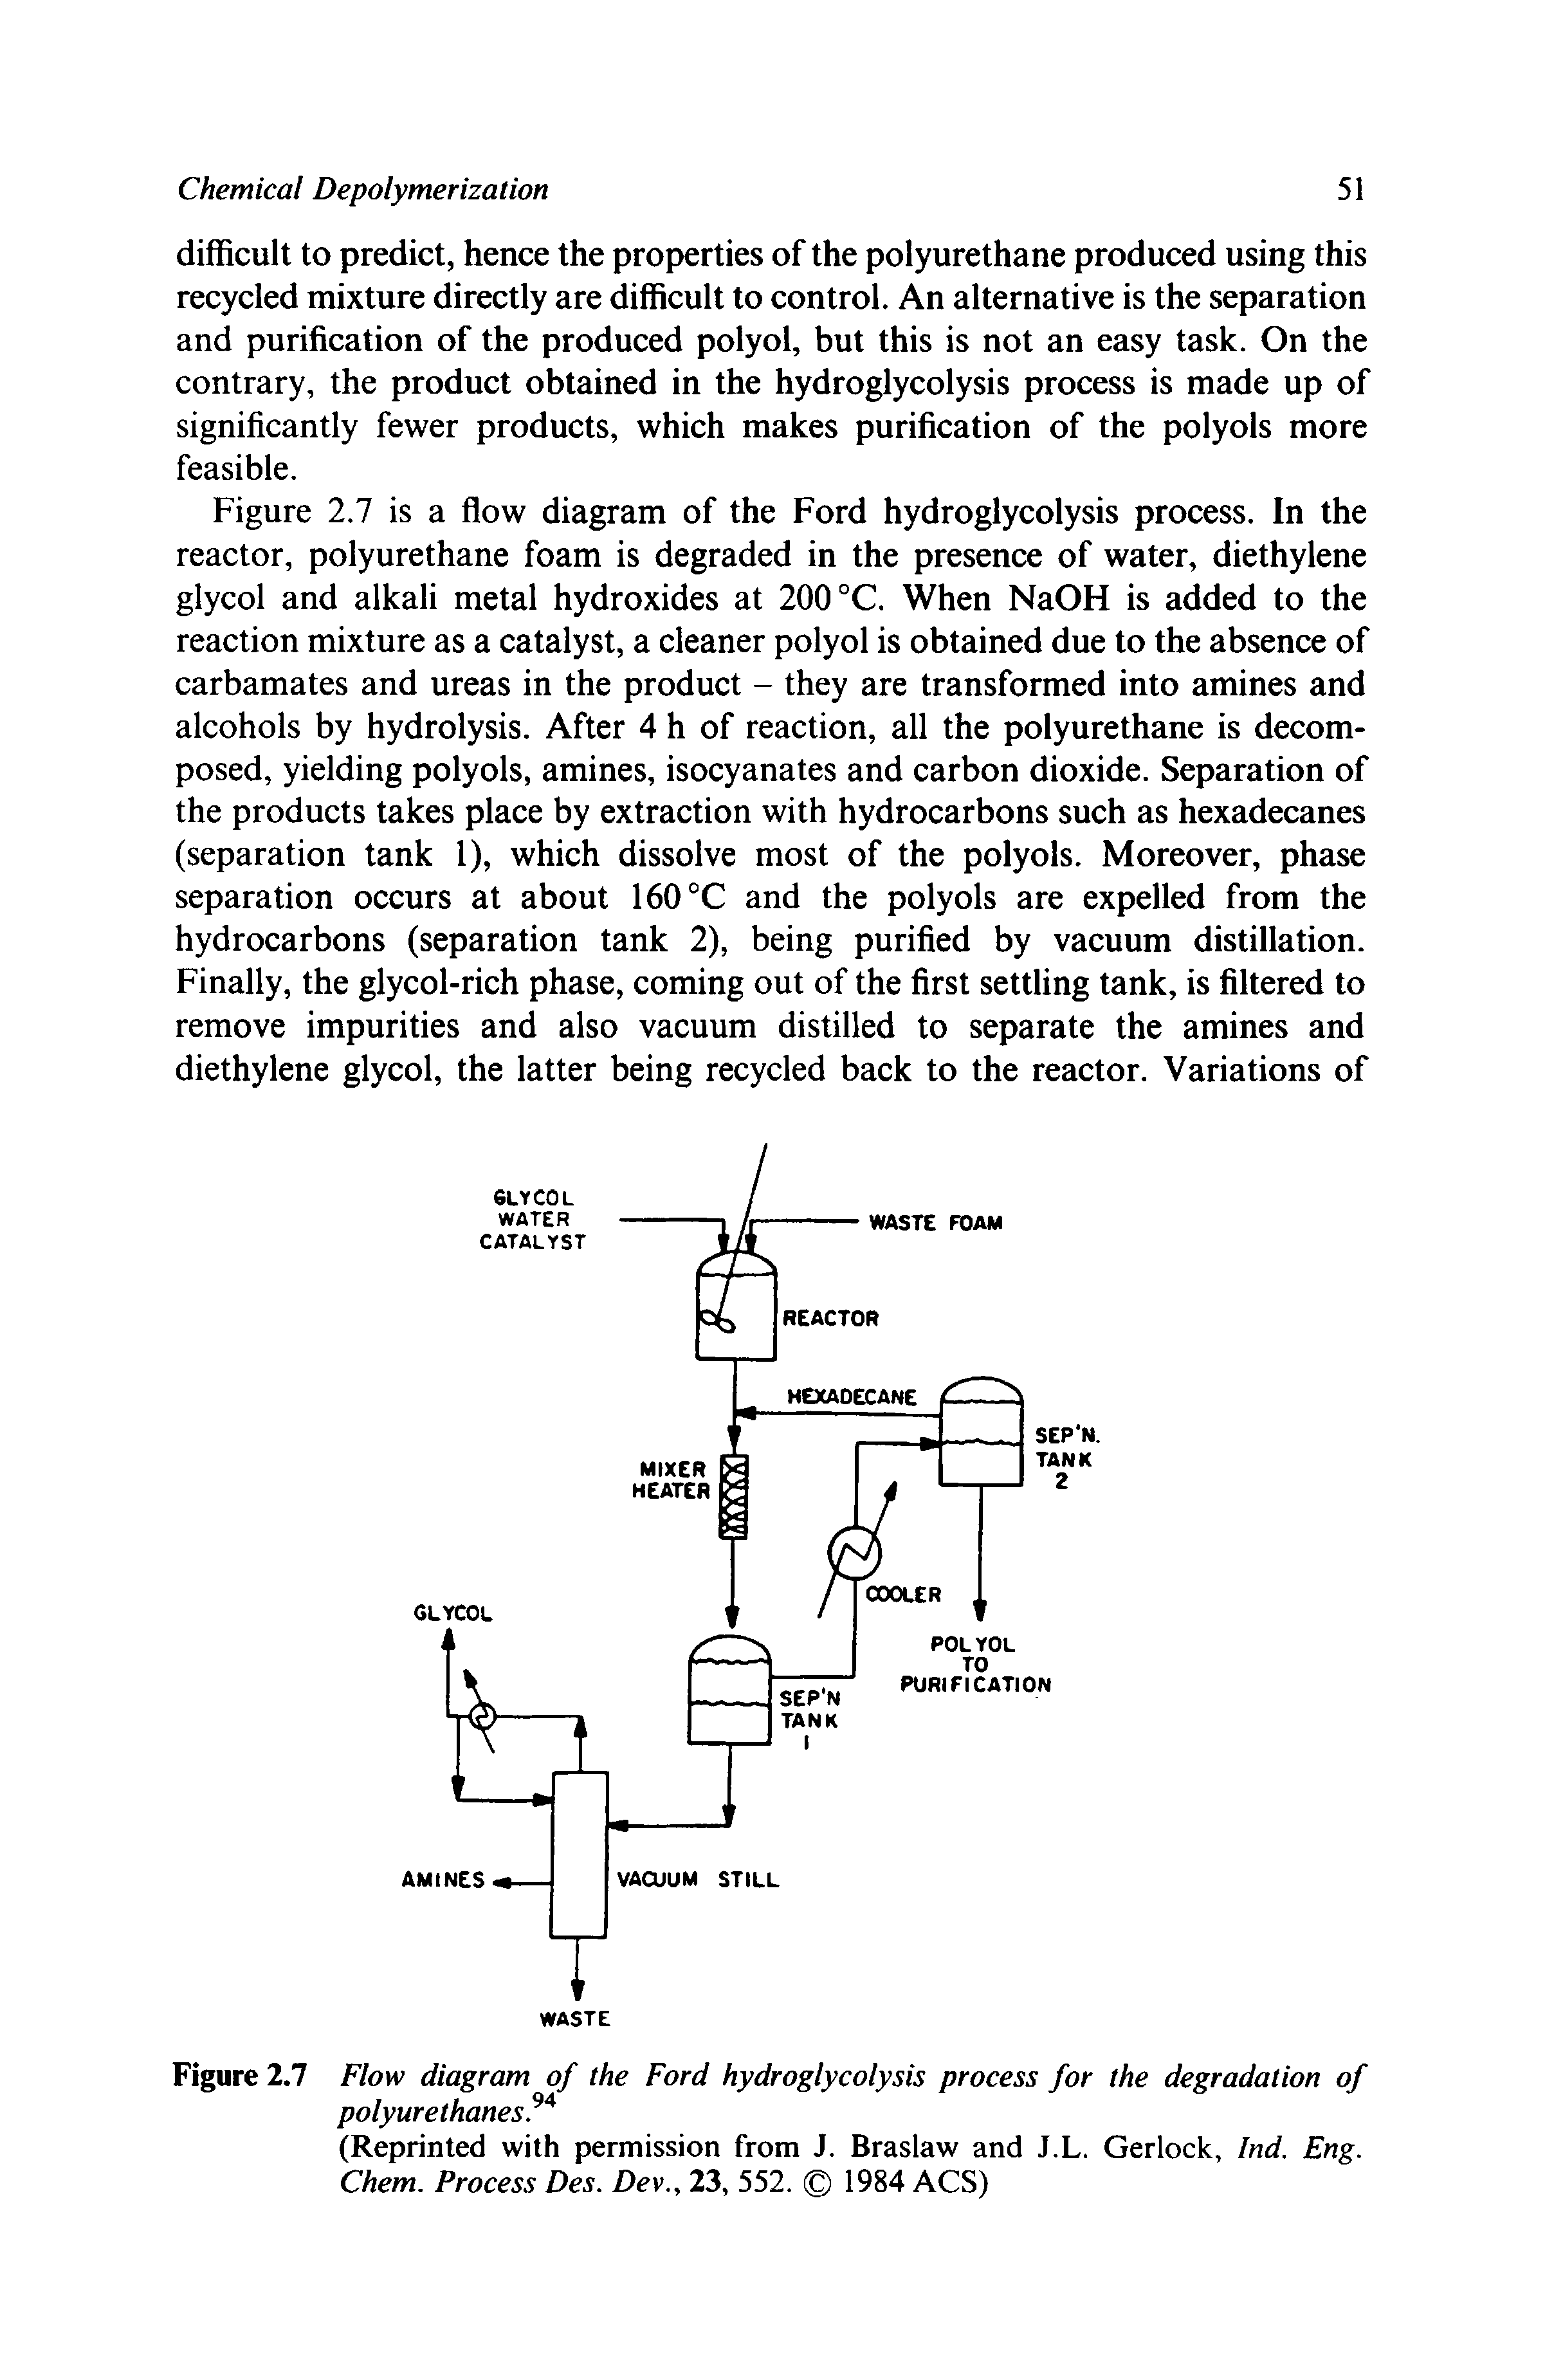 Figure 2.7 Flow diagram of the Ford hydroglycolysis process for the degradation of polyurethanes,94...